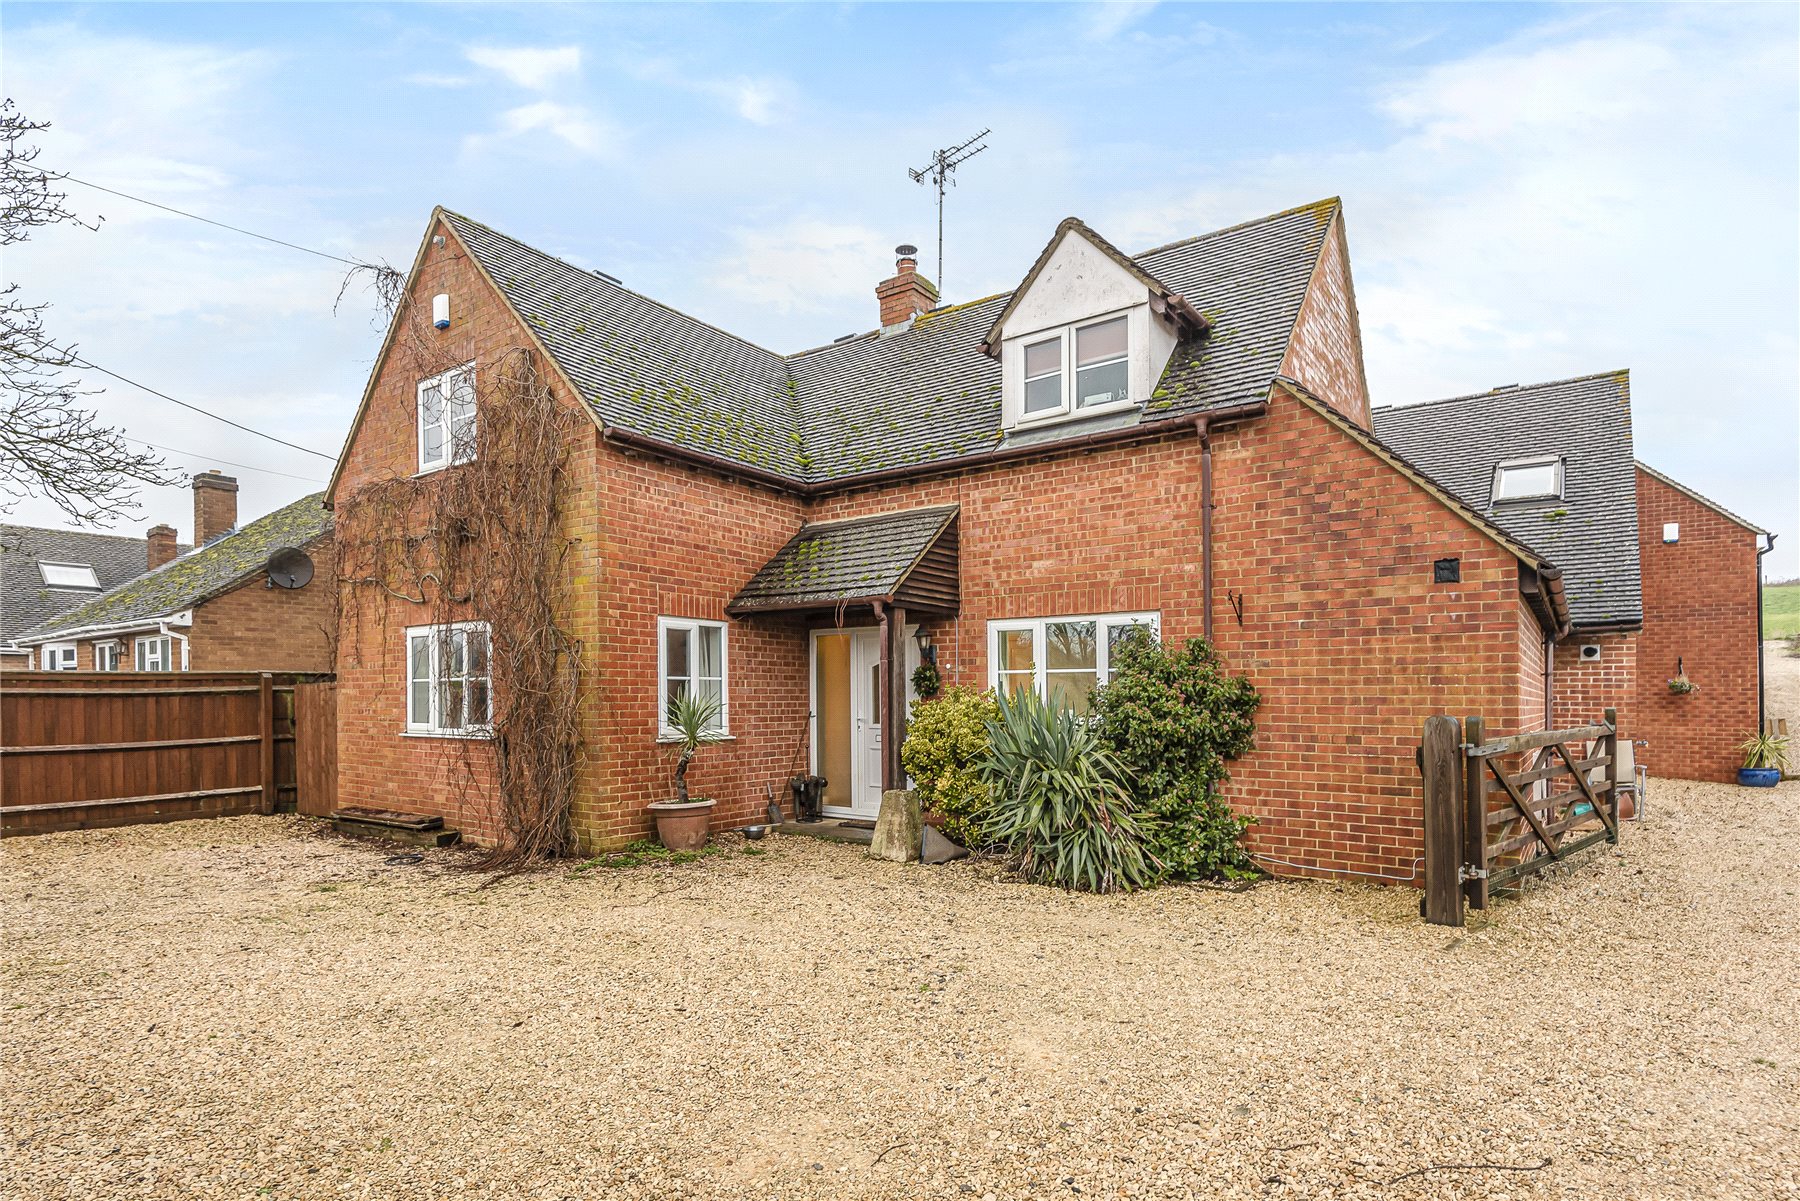 5 BEDROOM HOUSE, 3 BEDROOM ANNEX, TACKLEY, Oxfordshire, OX5